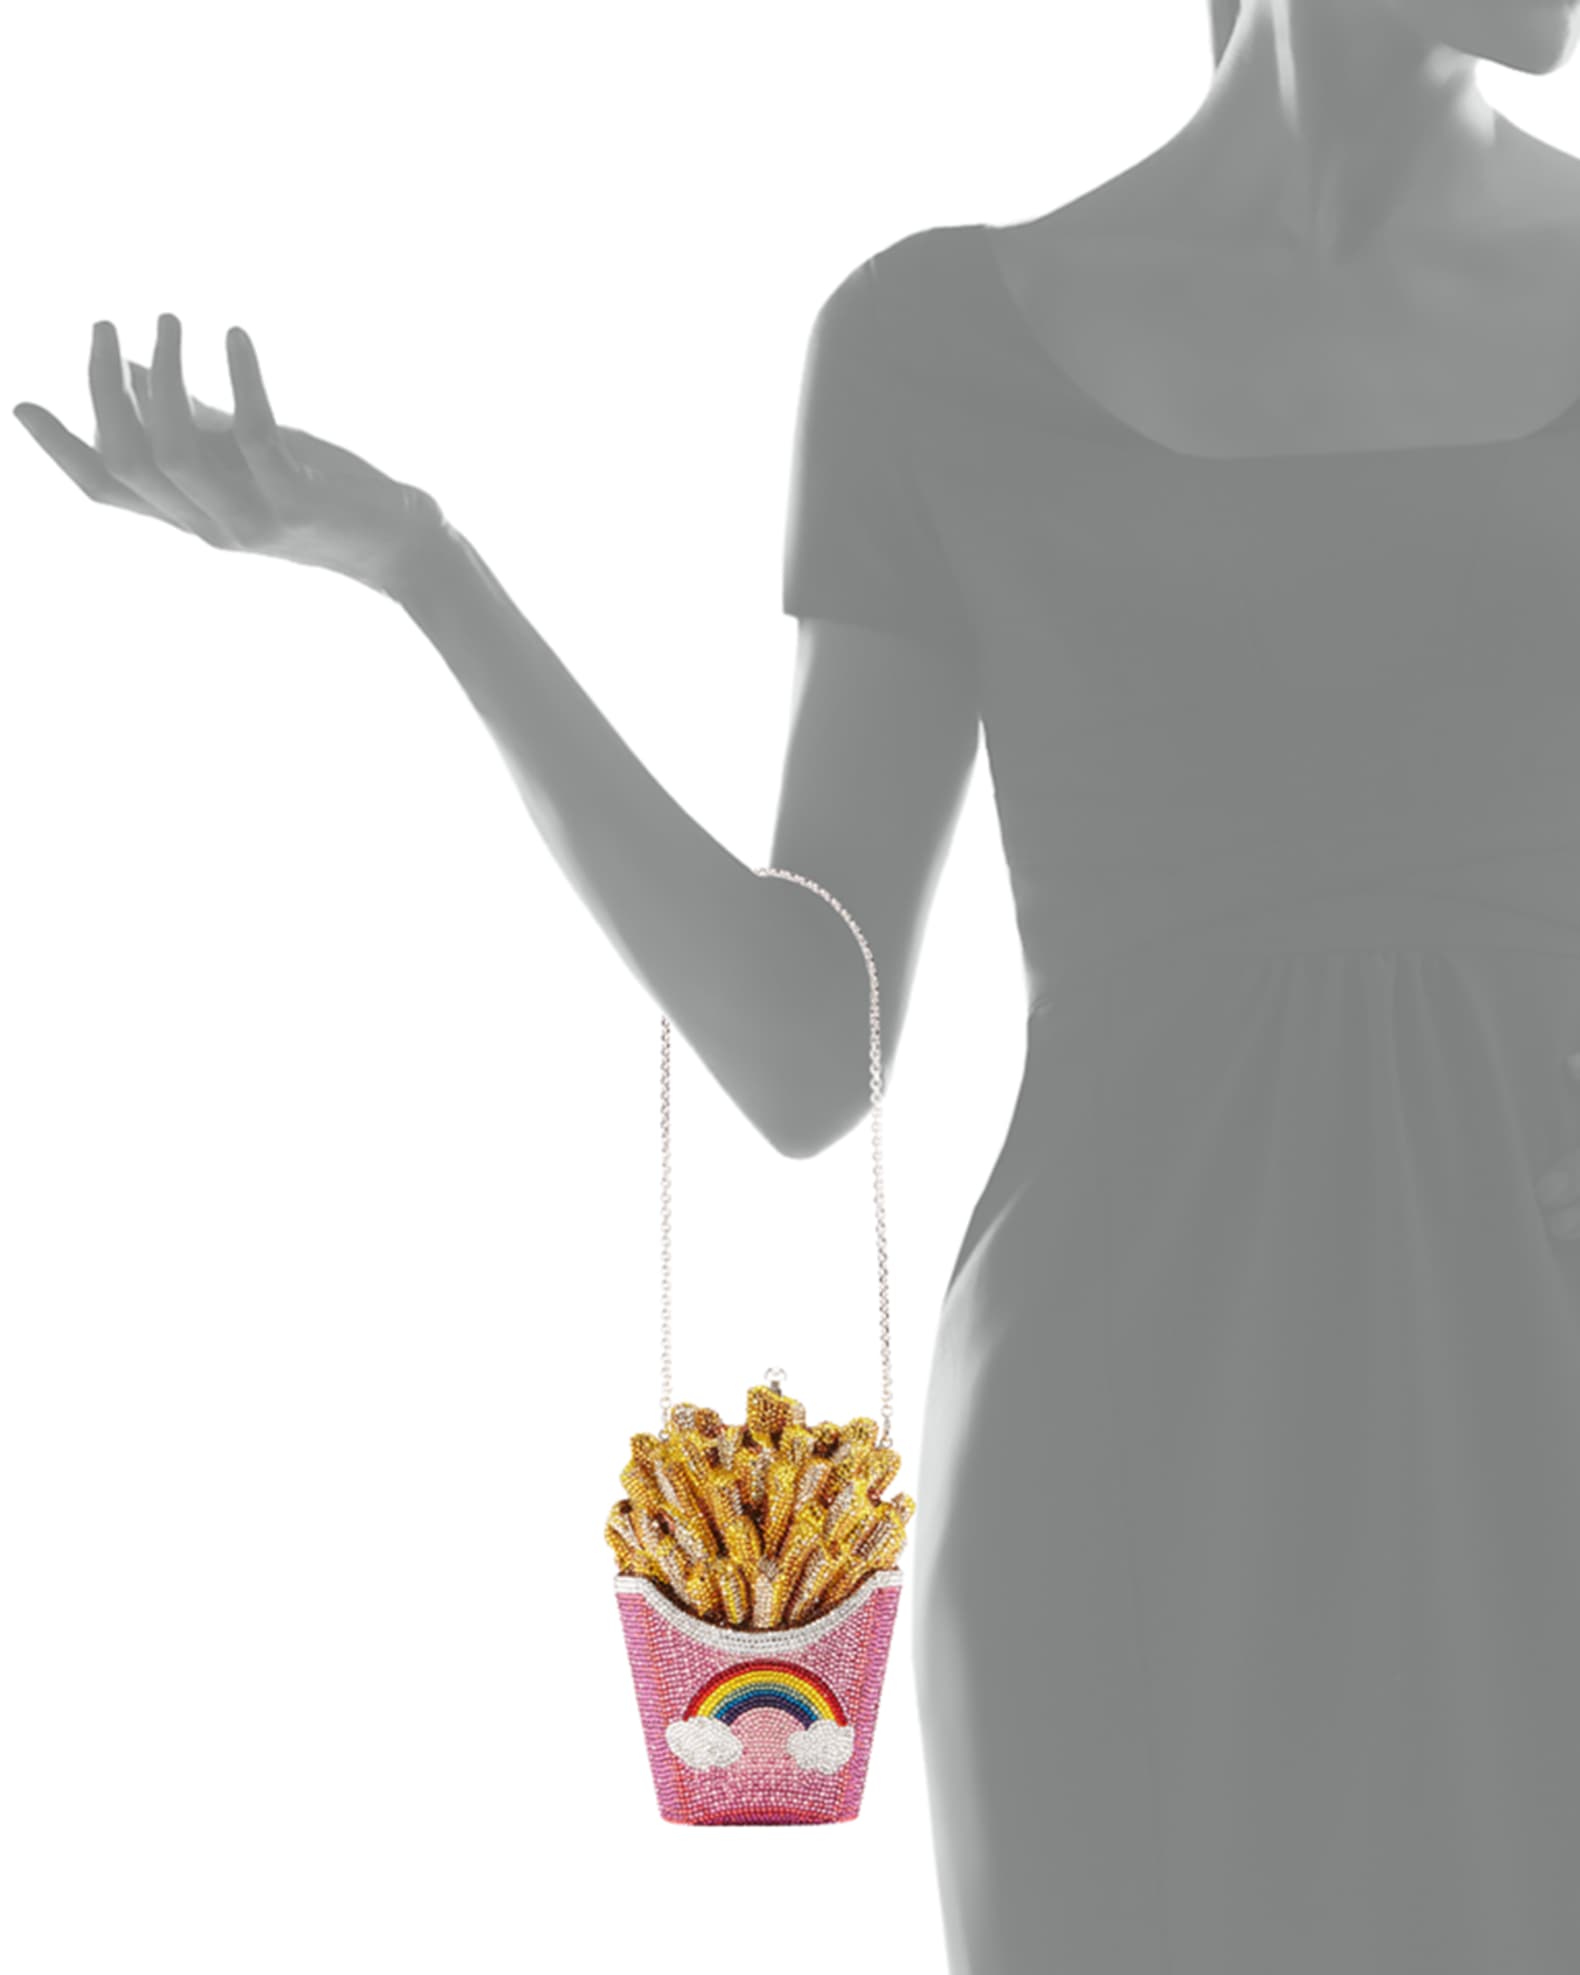 Judith Leiber Couture French Fries Rainbow Clutch Bag